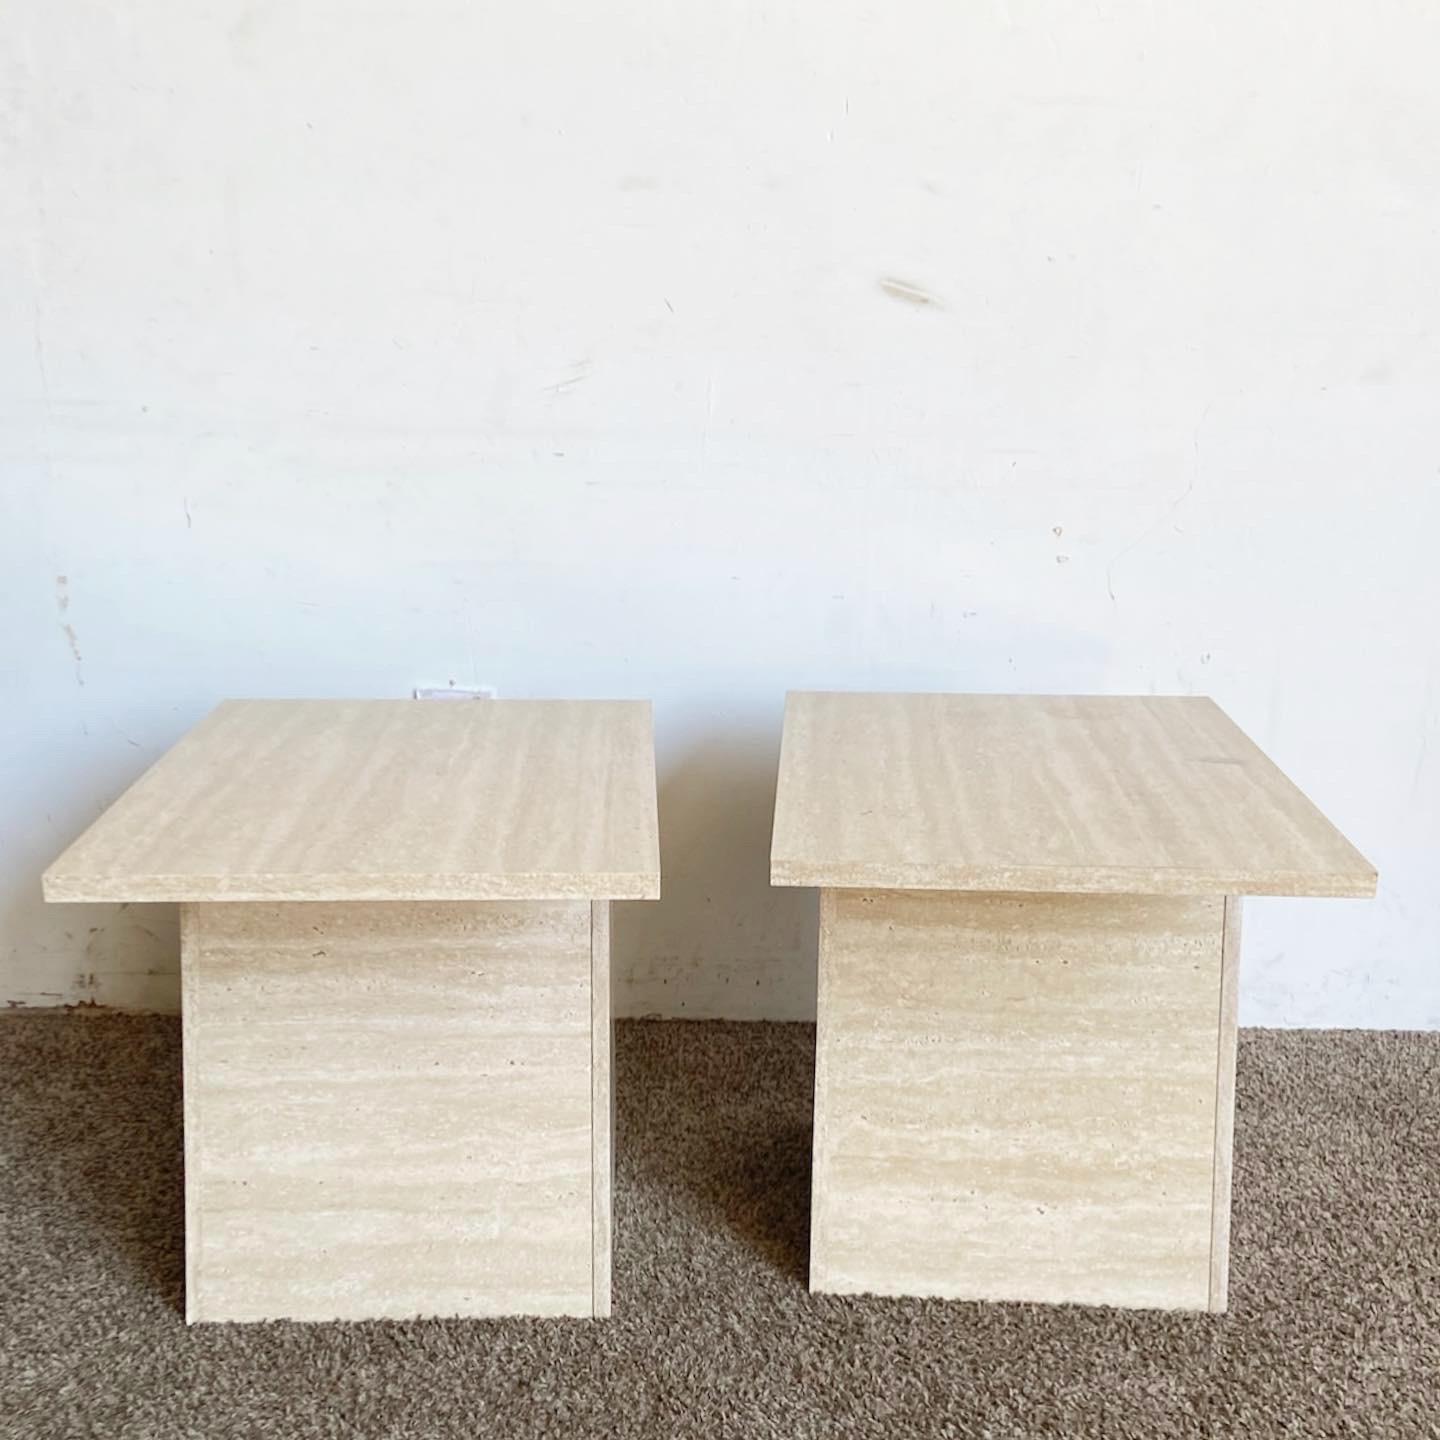 20th Century Postmodern Faux Travertine Laminate Side Tables - a Pair For Sale